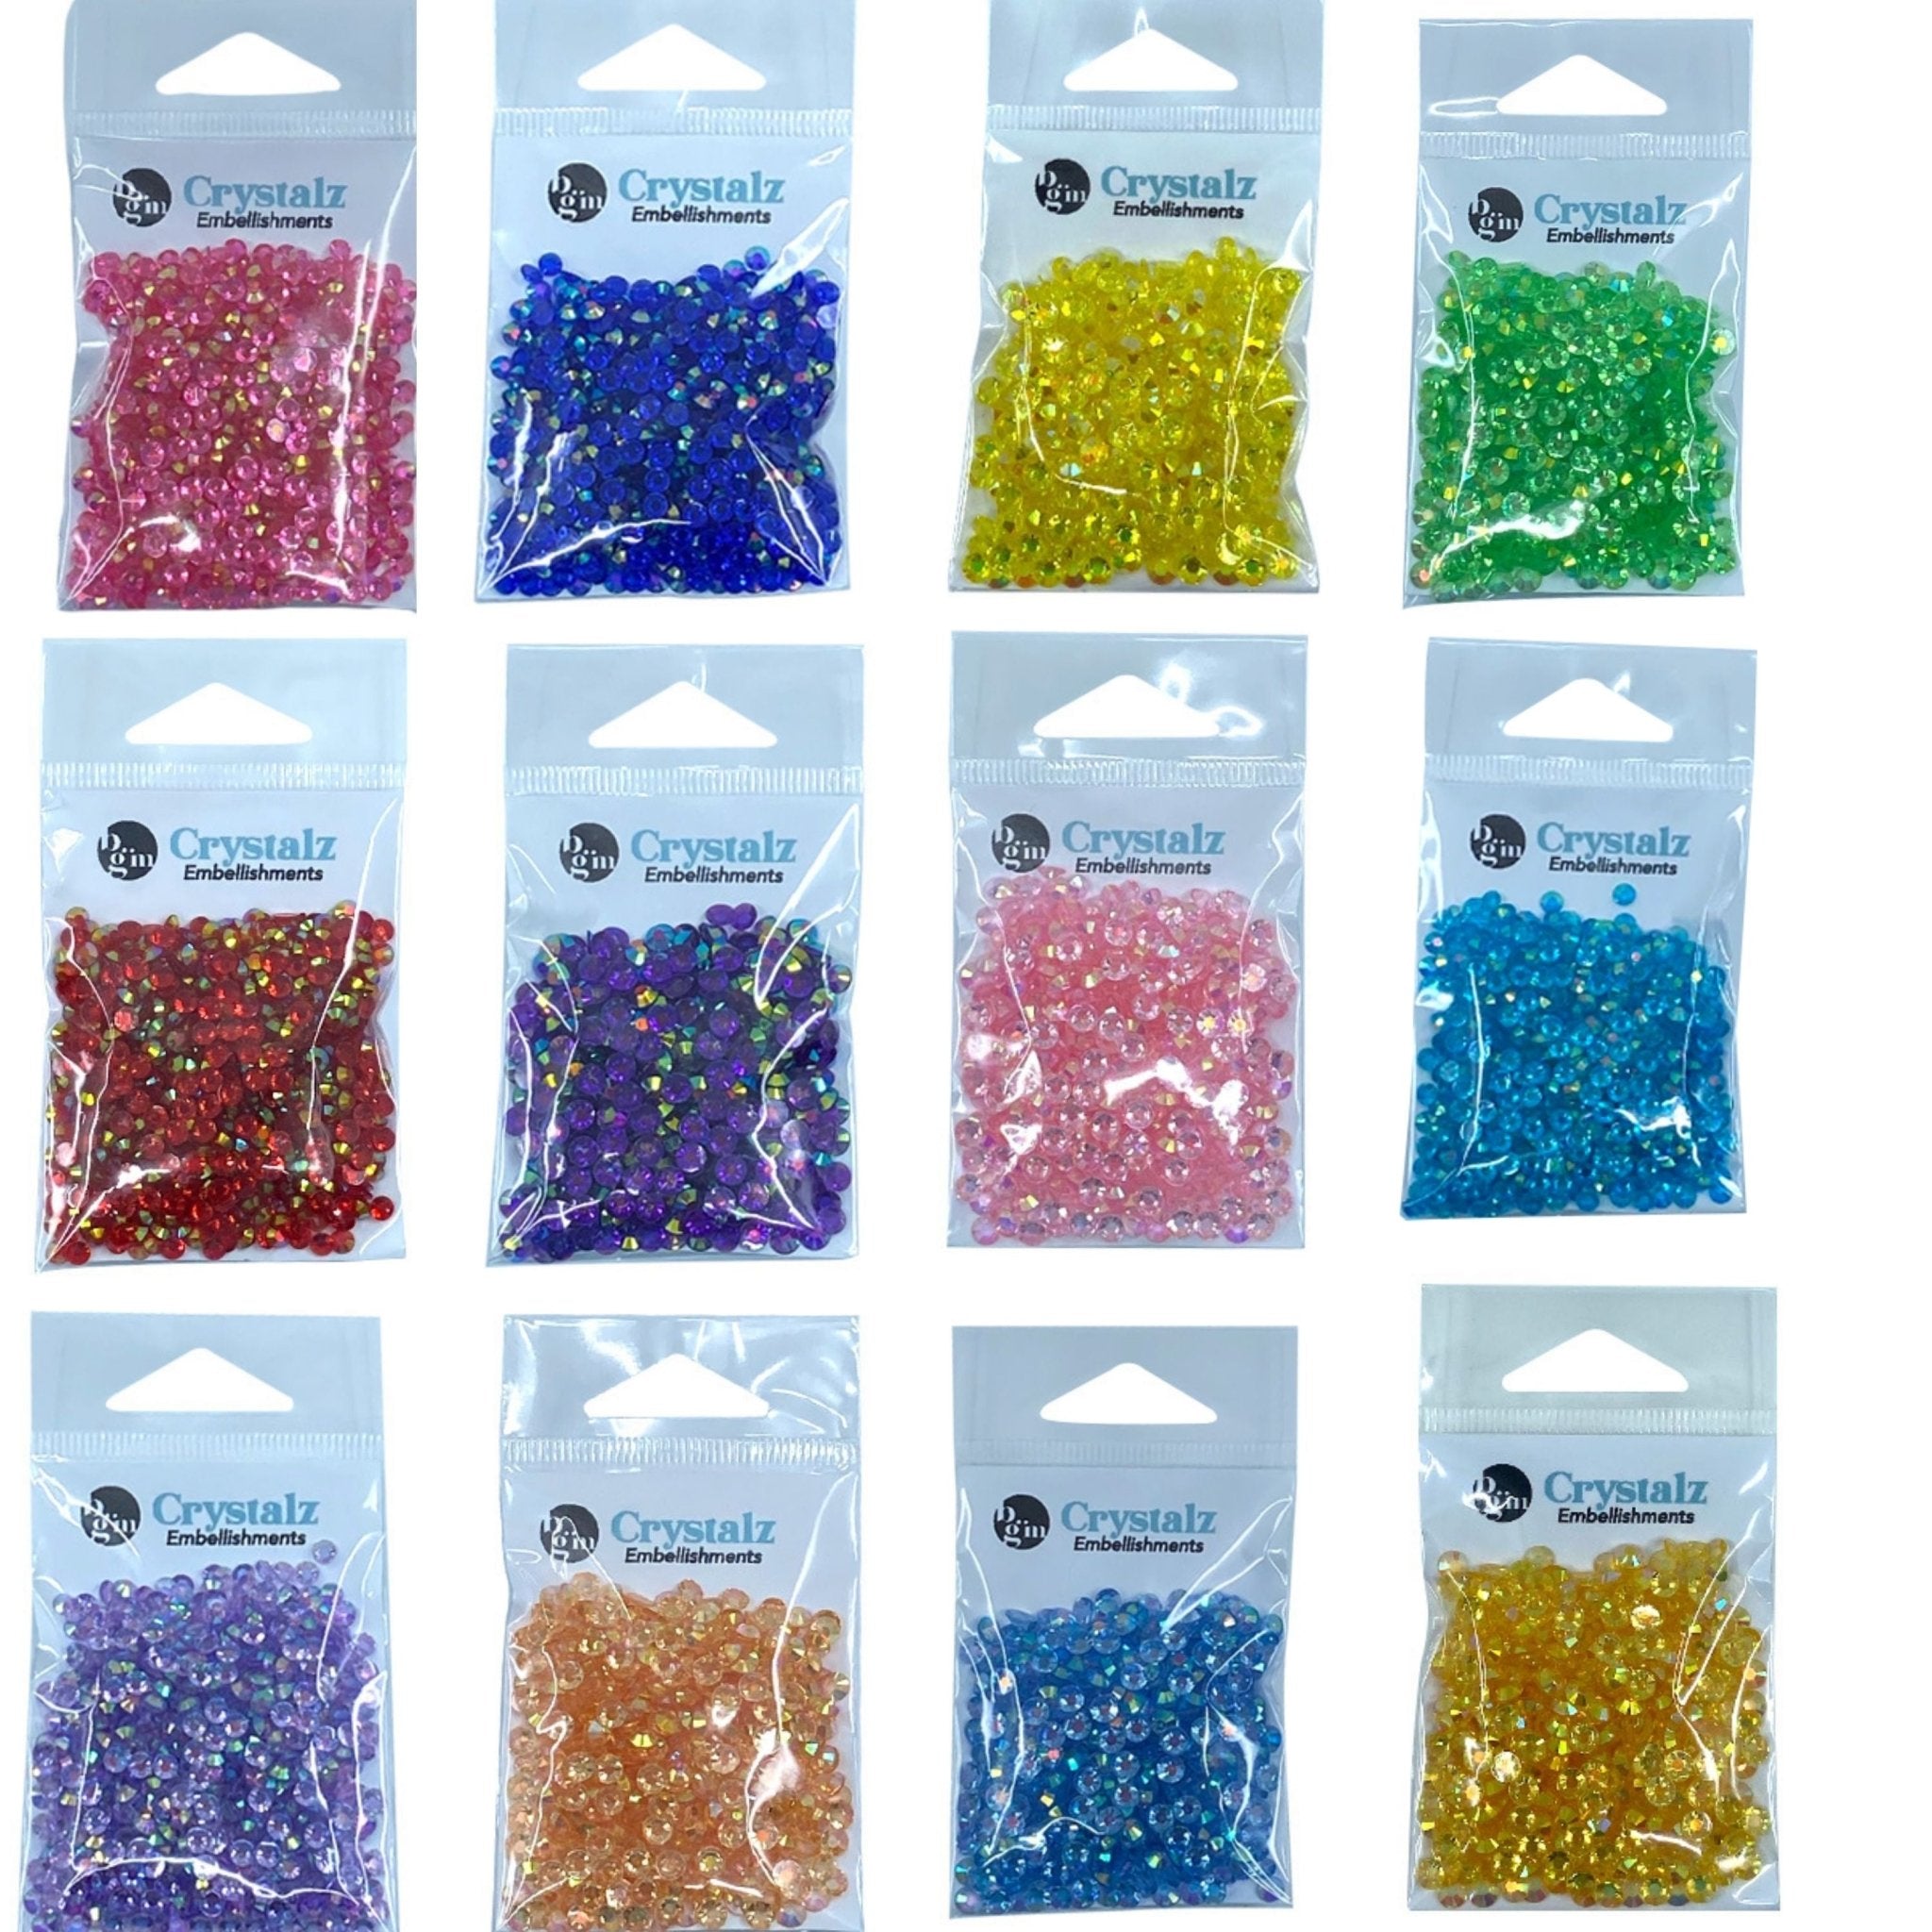 Buttons Galore Crystalz Iridescent Flat Back Gems for DIY Crafts, Scrapbooks, Paper Crafts - Twelve Colors 4800 Pieces - Buttons Galore and More